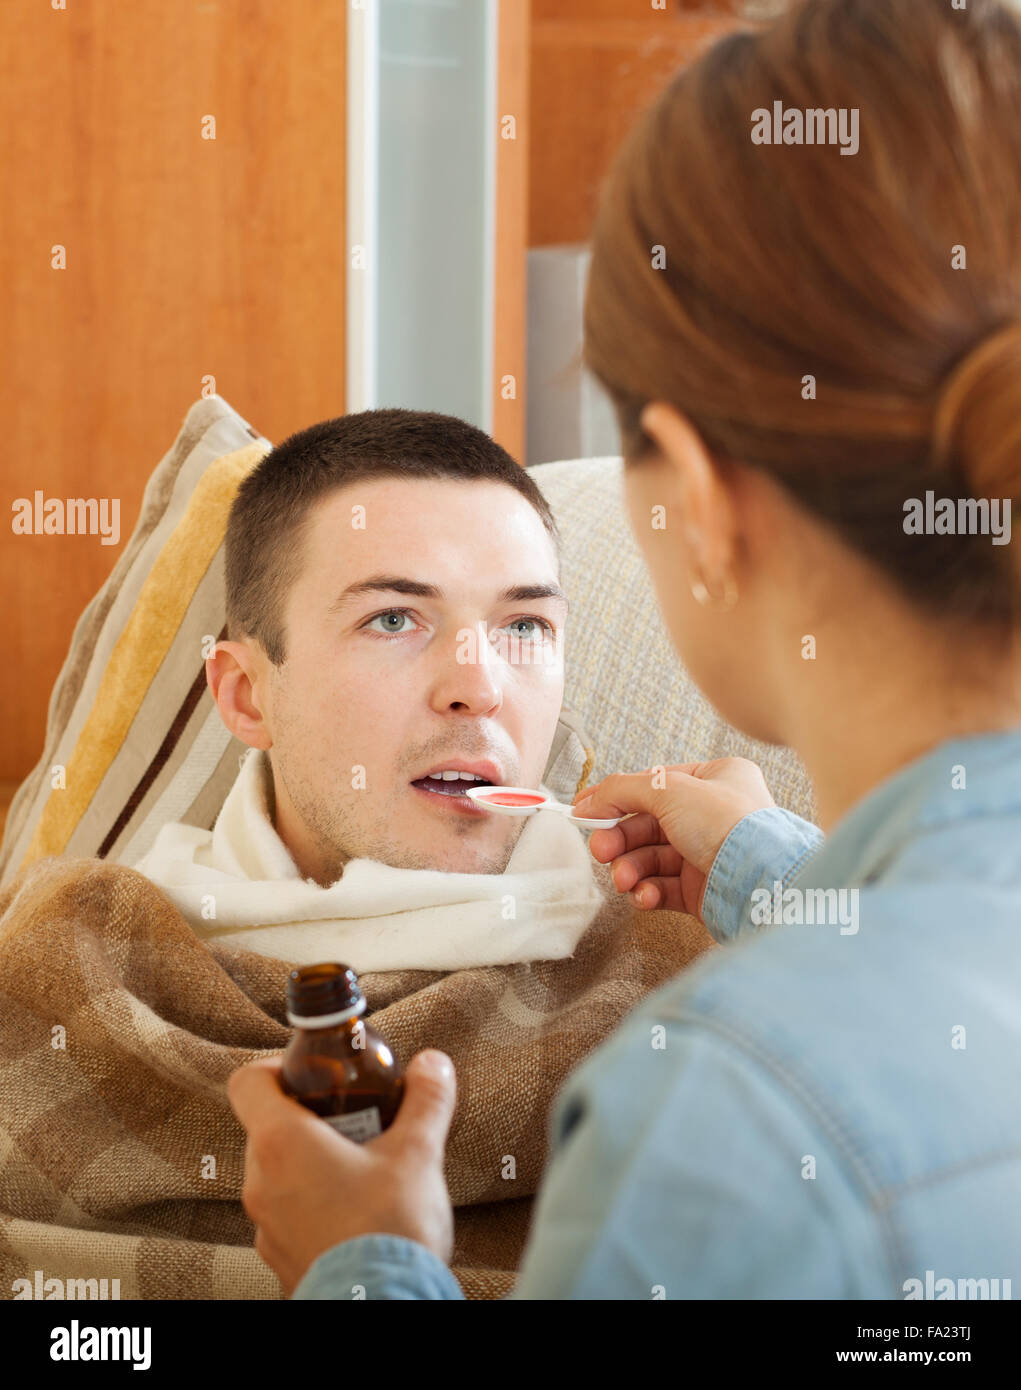 caring woman giving cough syrup to unwell man Stock Photo